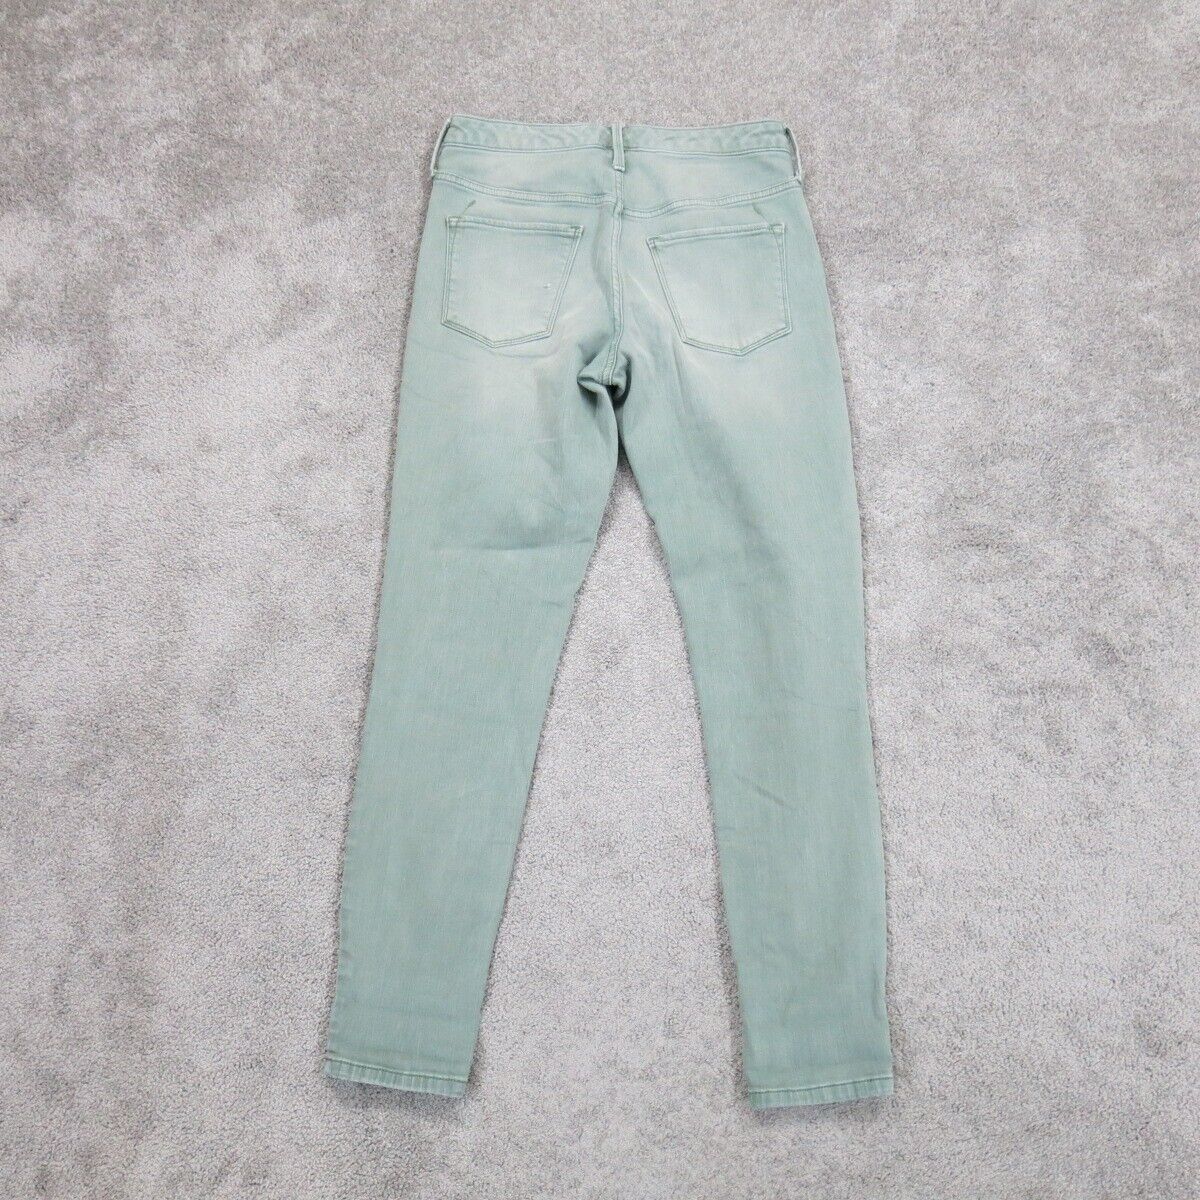 Massimo Denim Womens High Rise Skinny Jeans Pant Stretch Green Size 4R